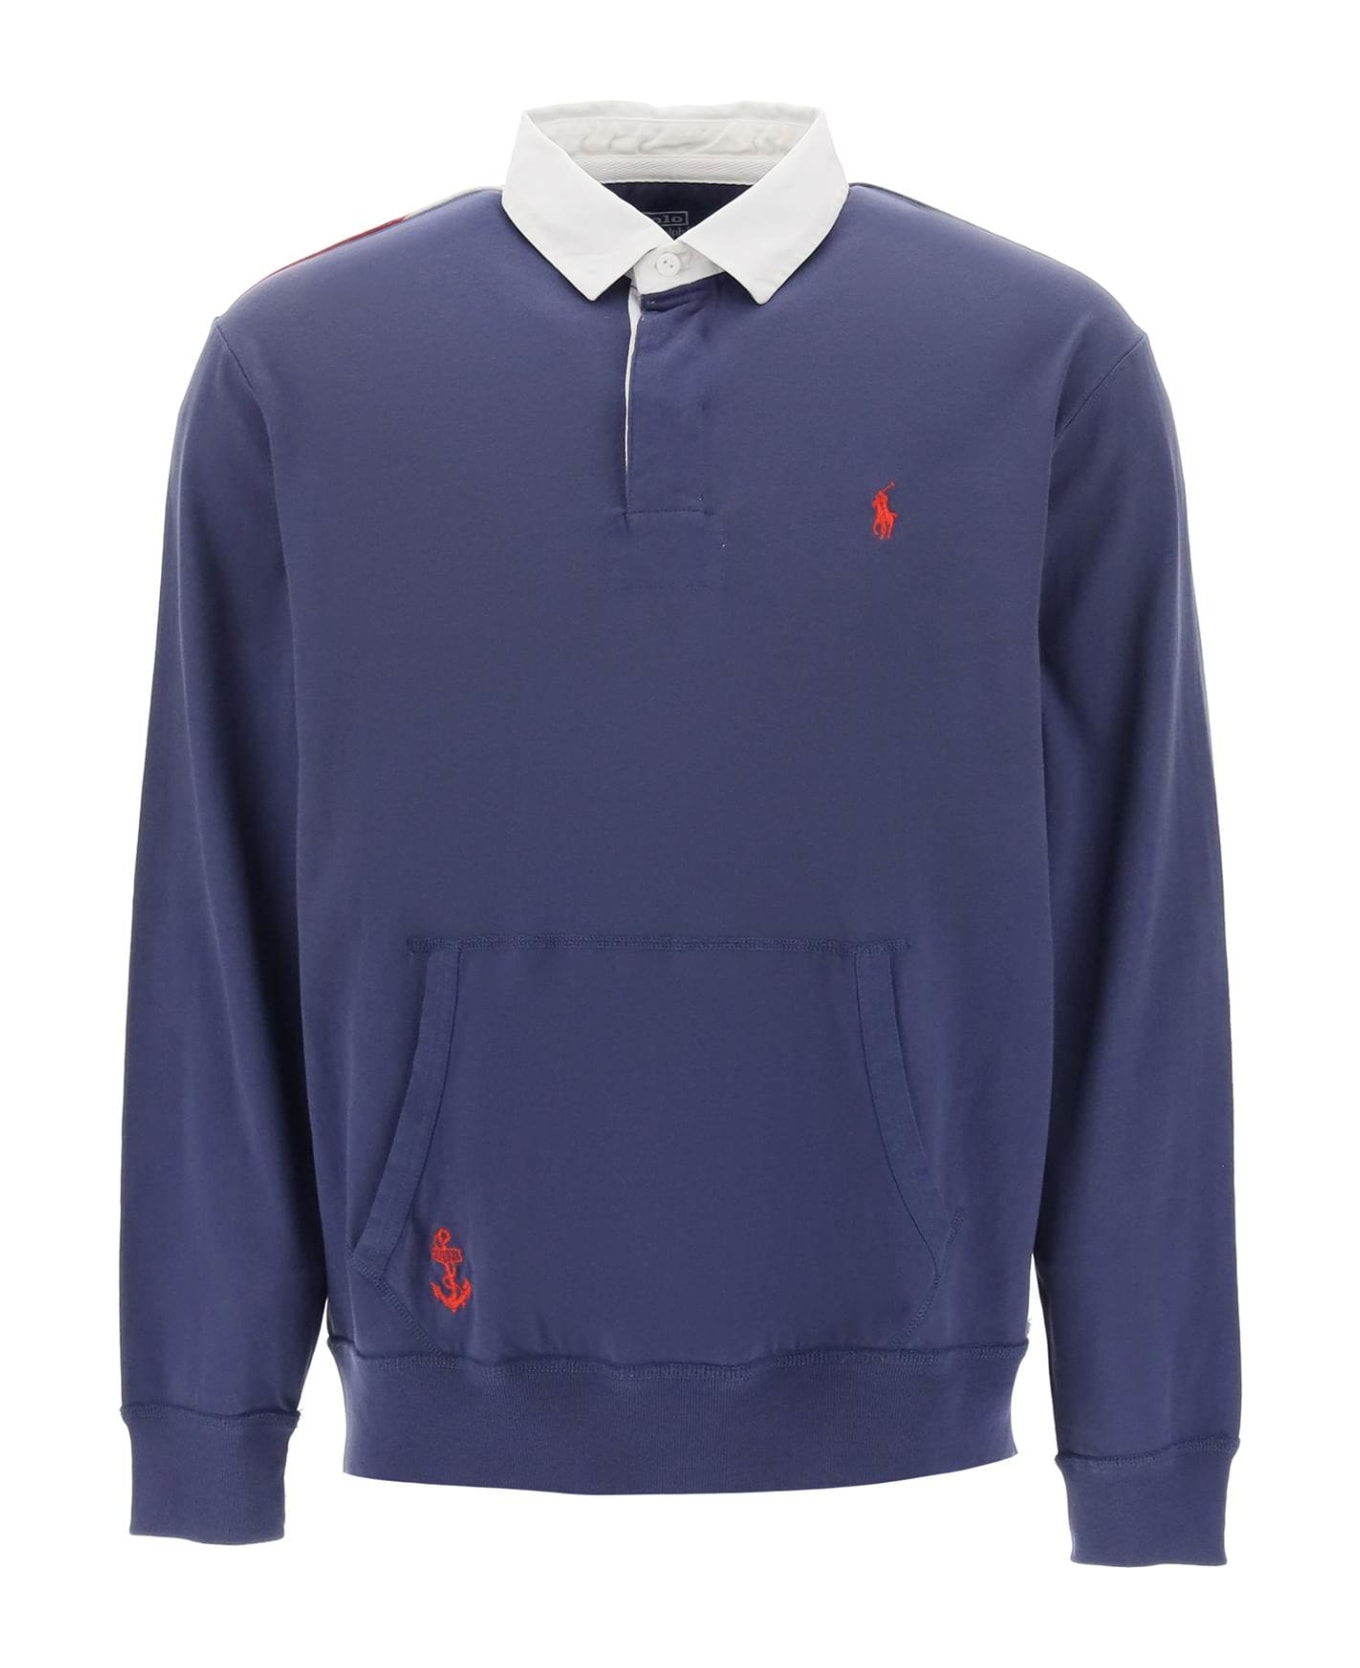 Polo Ralph Lauren Flag Patch Long Sleeve Rugby Shirt - BOATHOUSE NAVY (Blue)